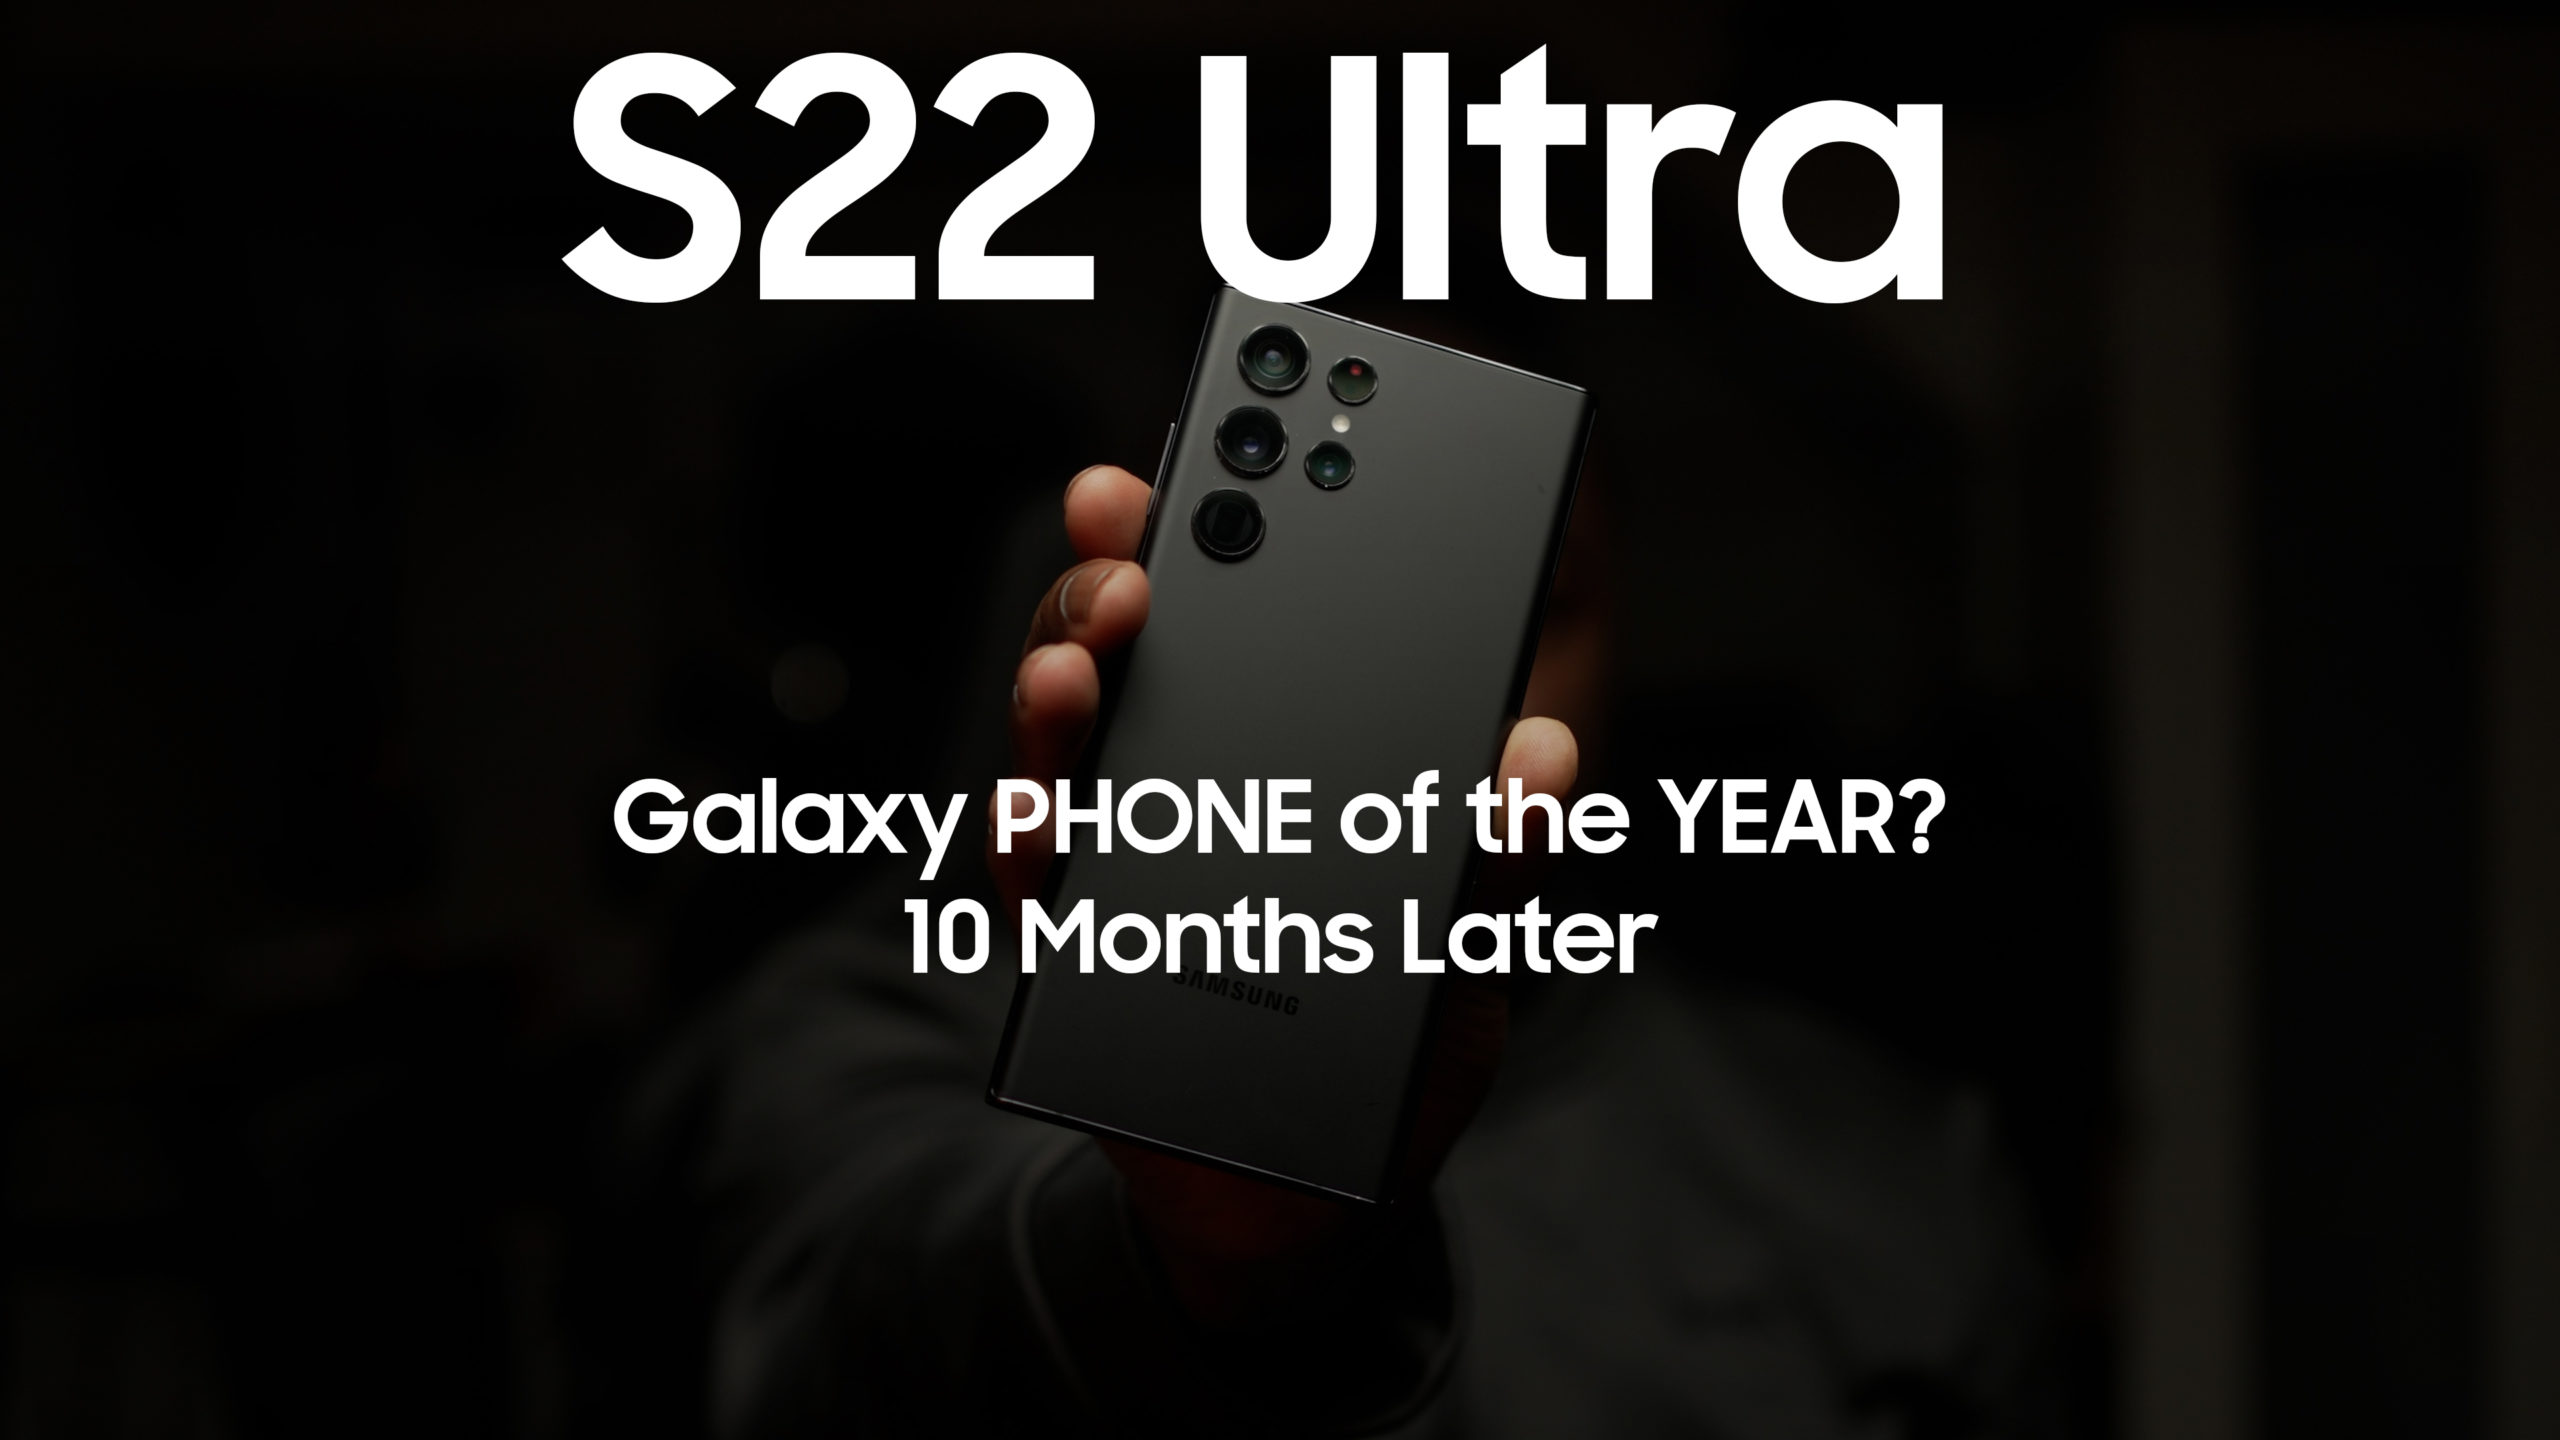 Samsung Galaxy S21 Ultra review: Oh so close to perfect - SamMobile